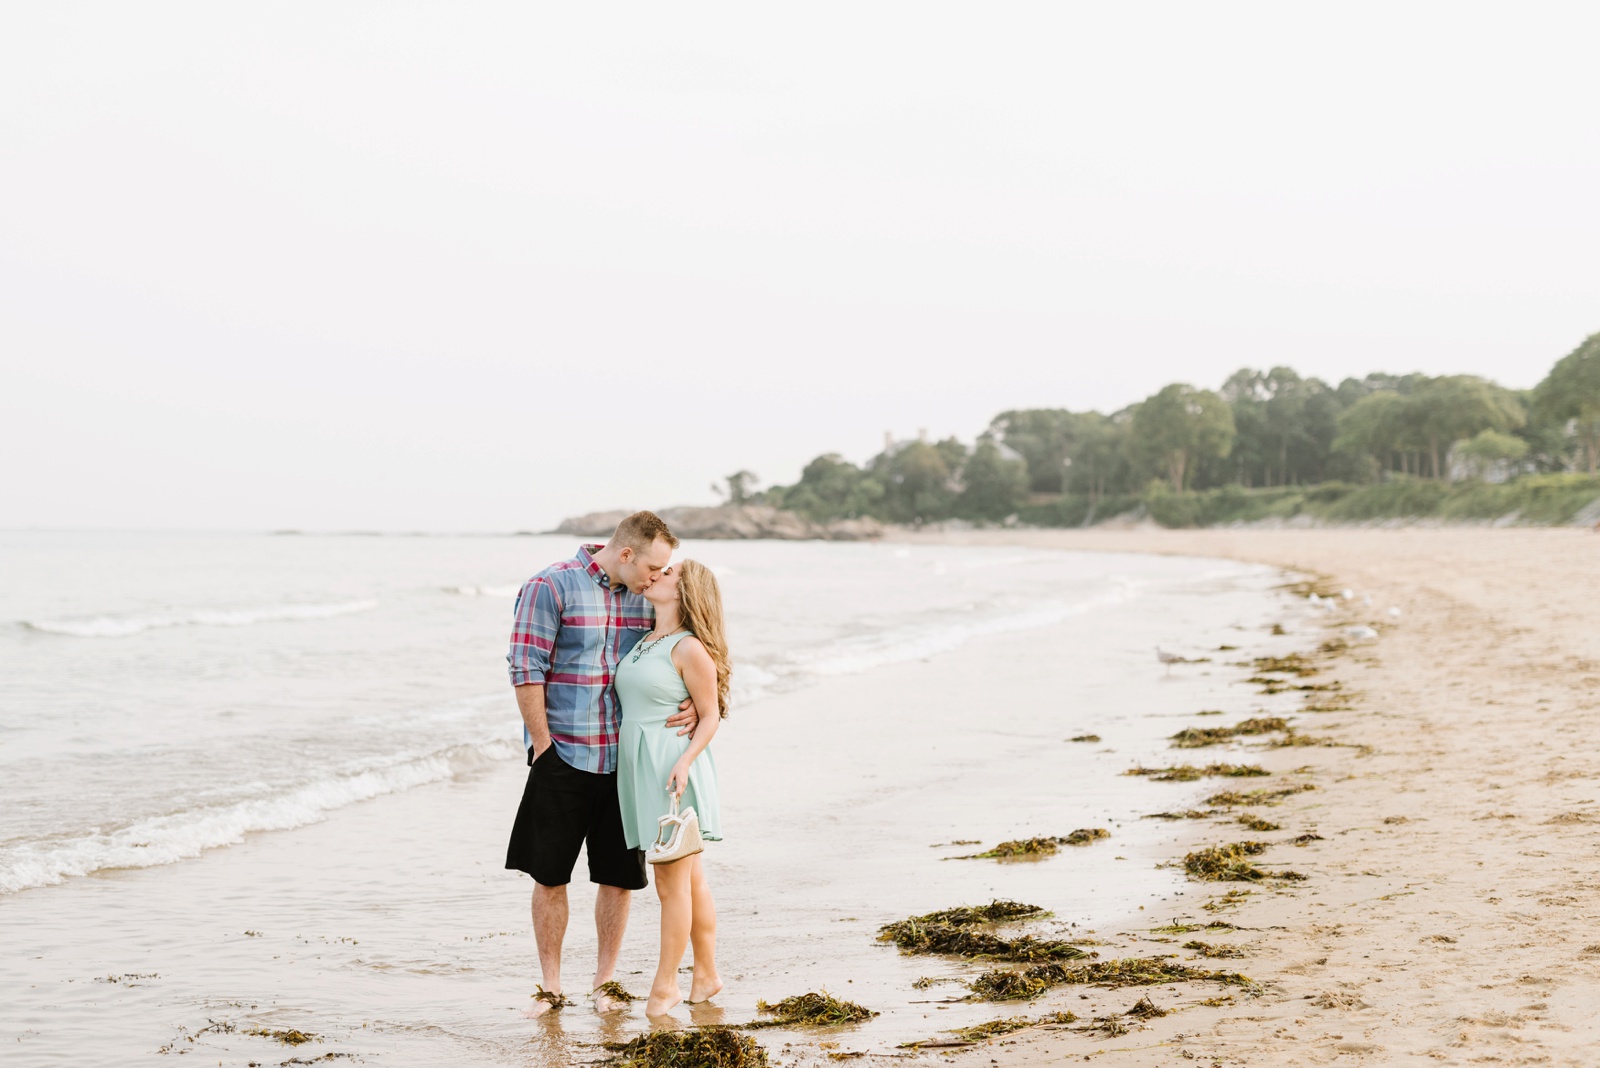 Romantic Seaside Engagement Session at Singing Beach in Manchester, MA by Boston Wedding Photographer Annmarie Swift